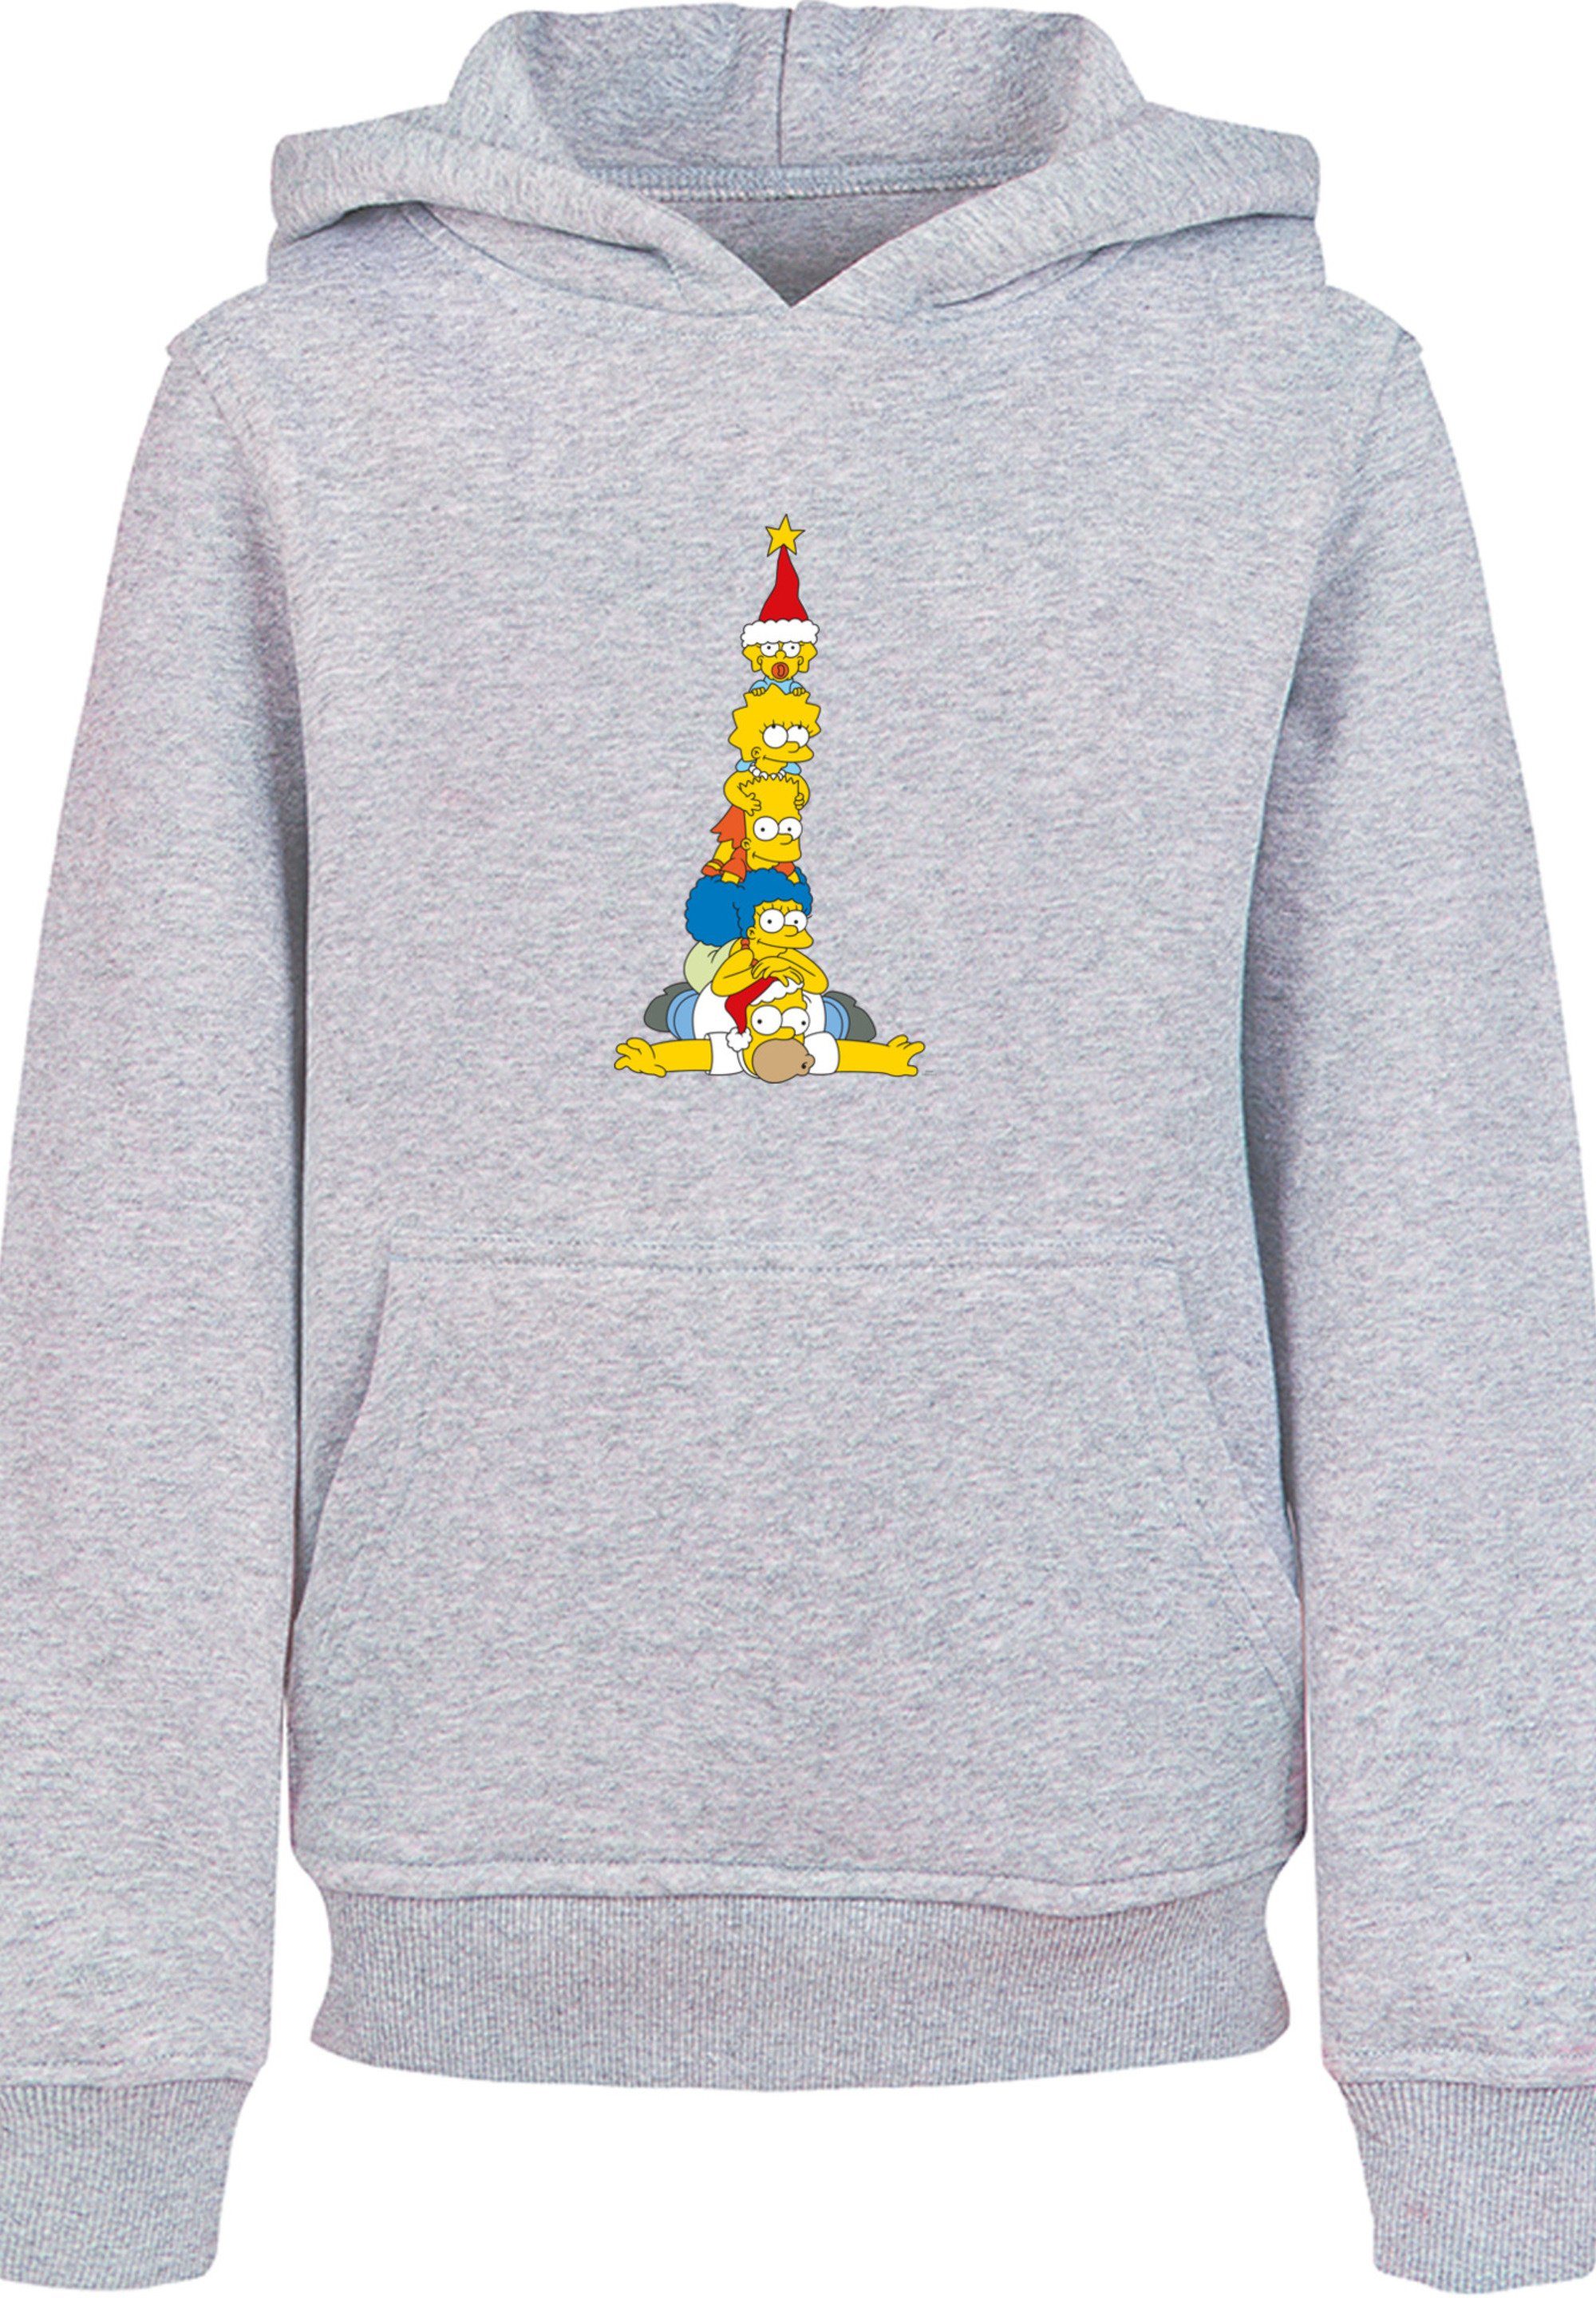 F4NT4STIC Kapuzenpullover The Simpsons grey Print Family Christmas Weihnachtsbaum heather